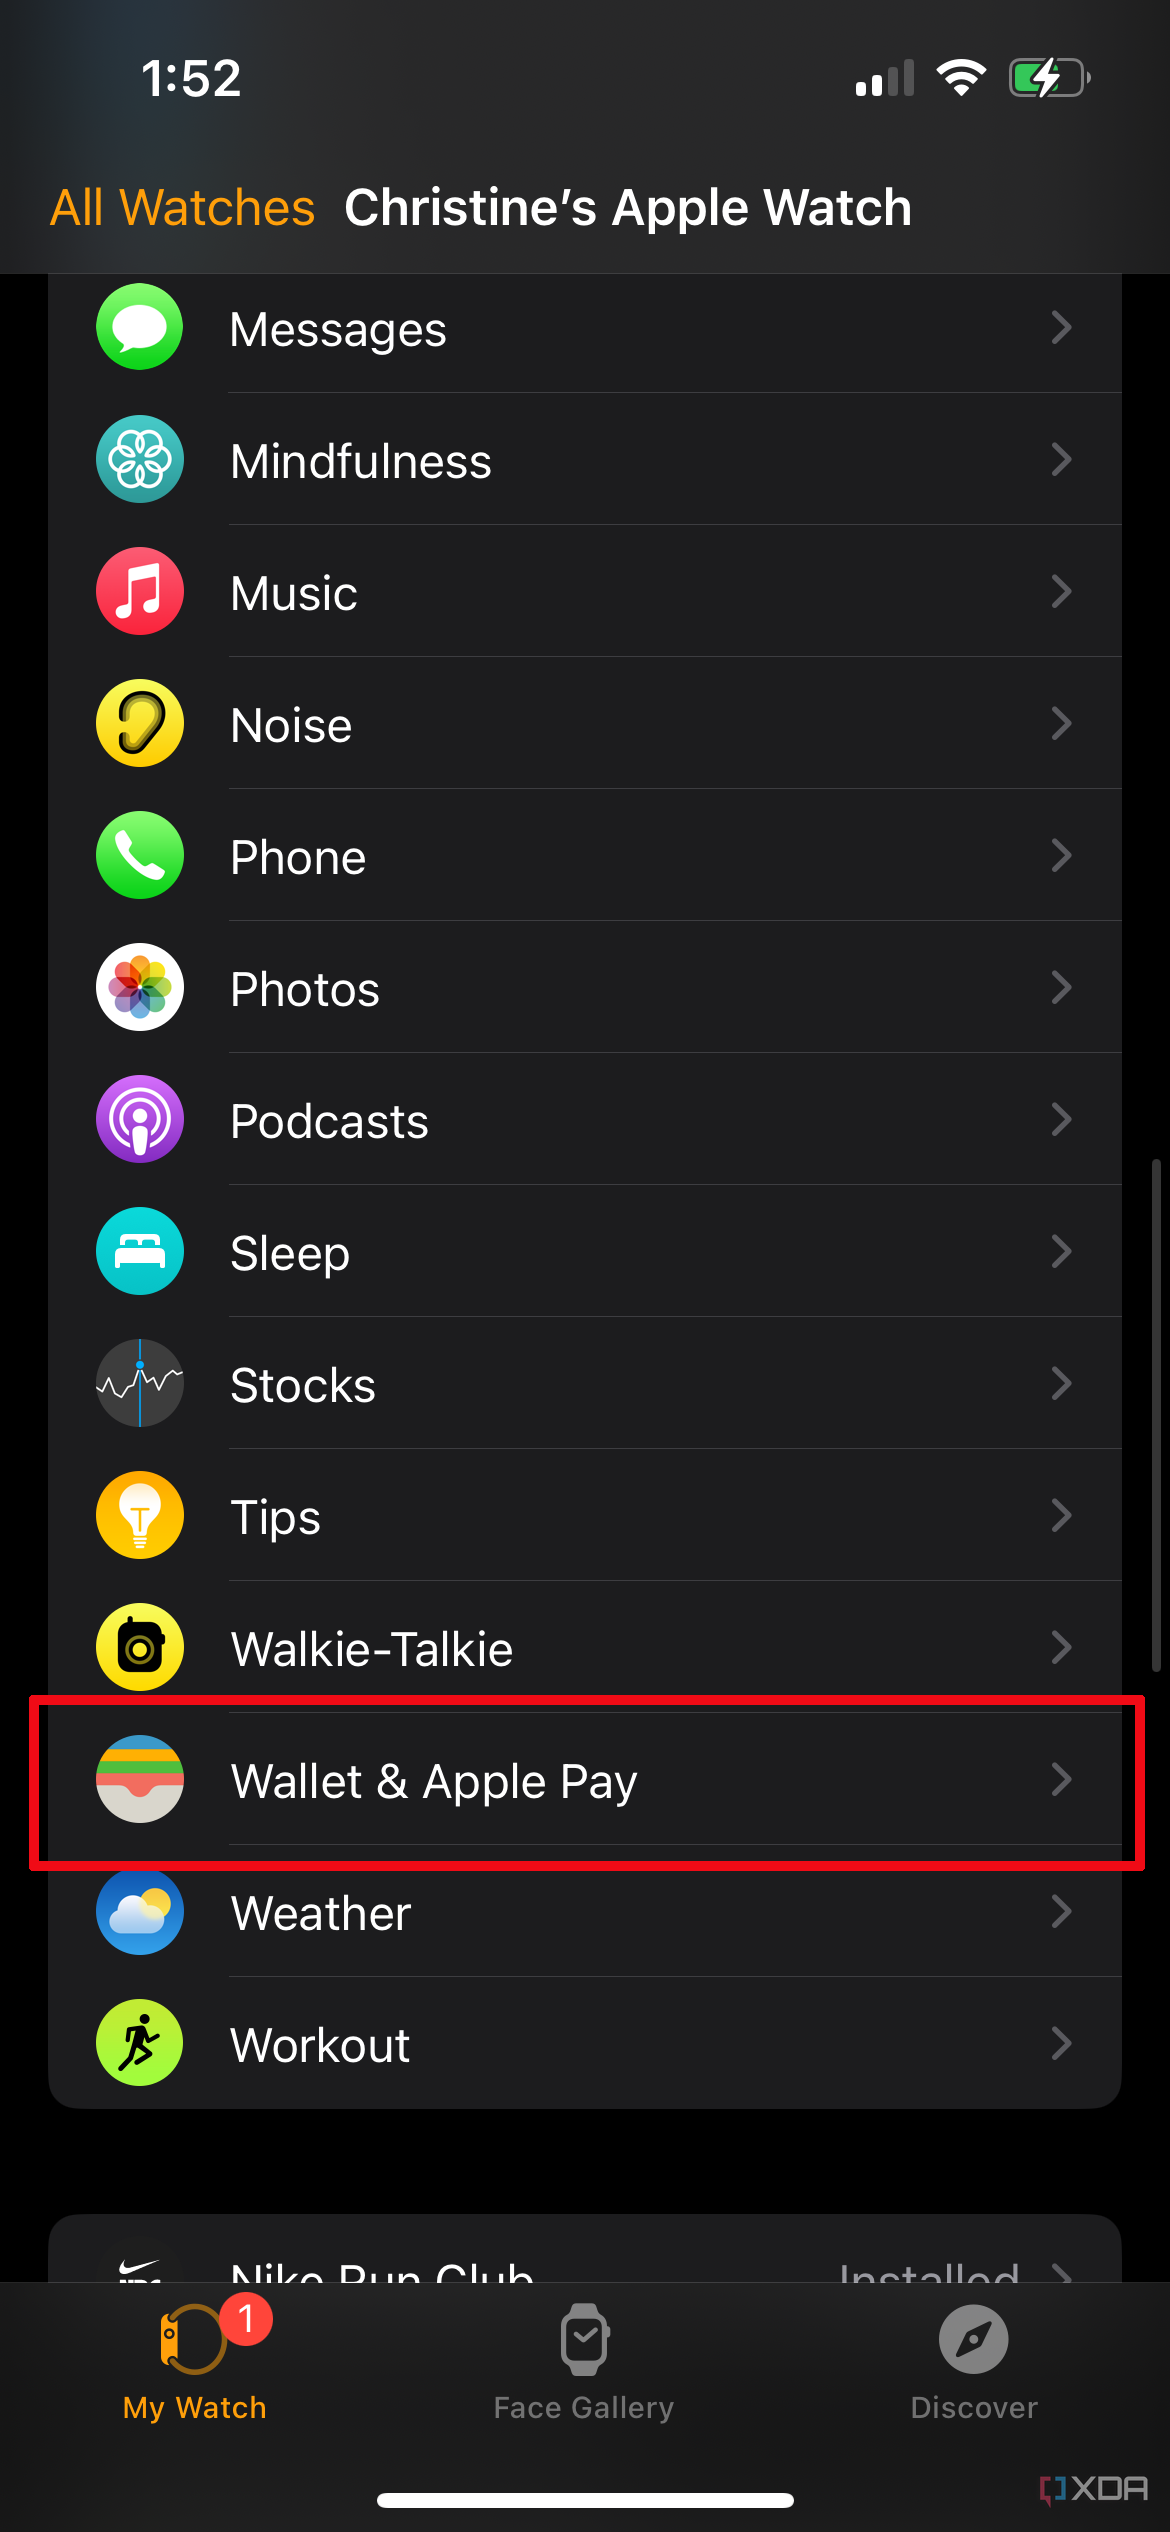 Apple Watch apps list in app with Wallet & Apple Pay highlighted.